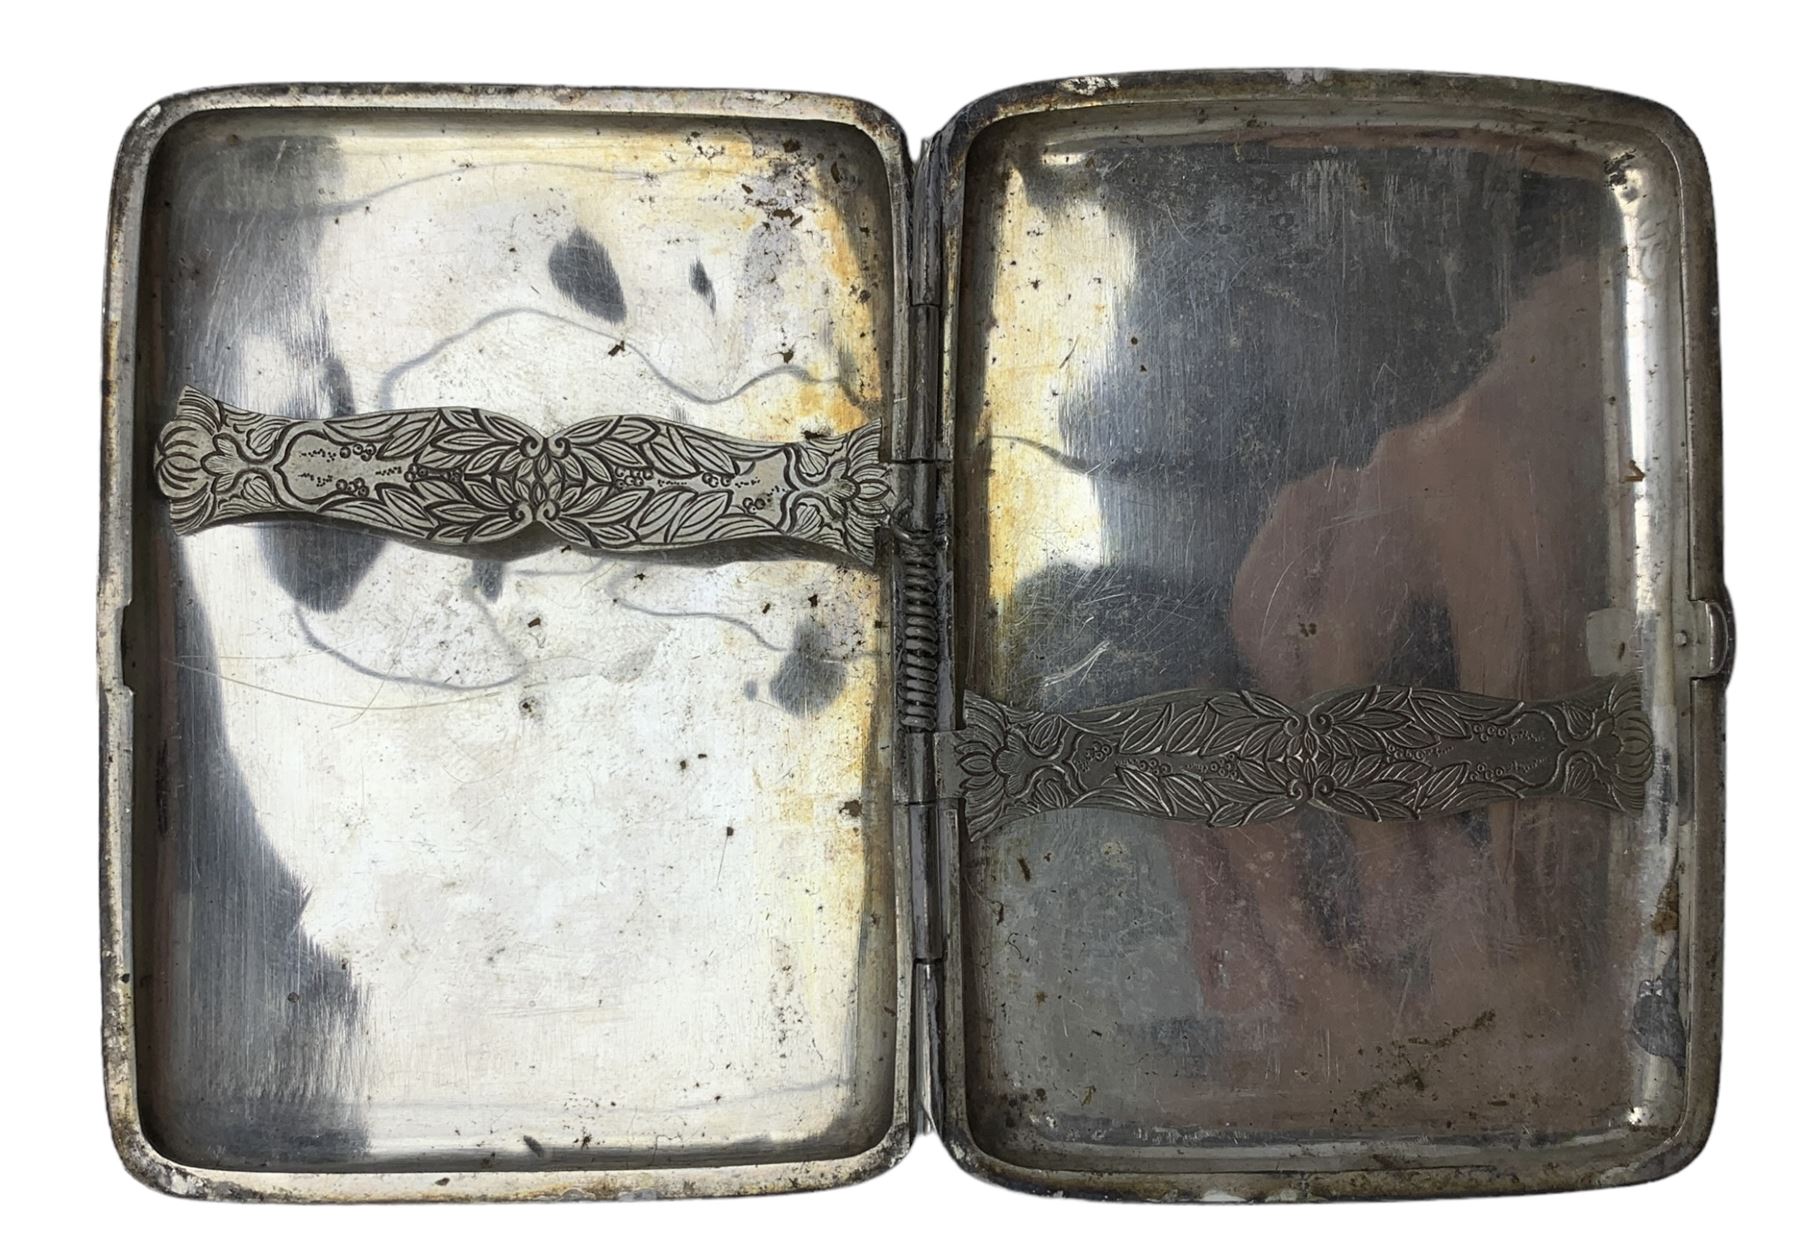 Japanese silver cigarette case decorated with a raised pattern of insects - Image 3 of 3